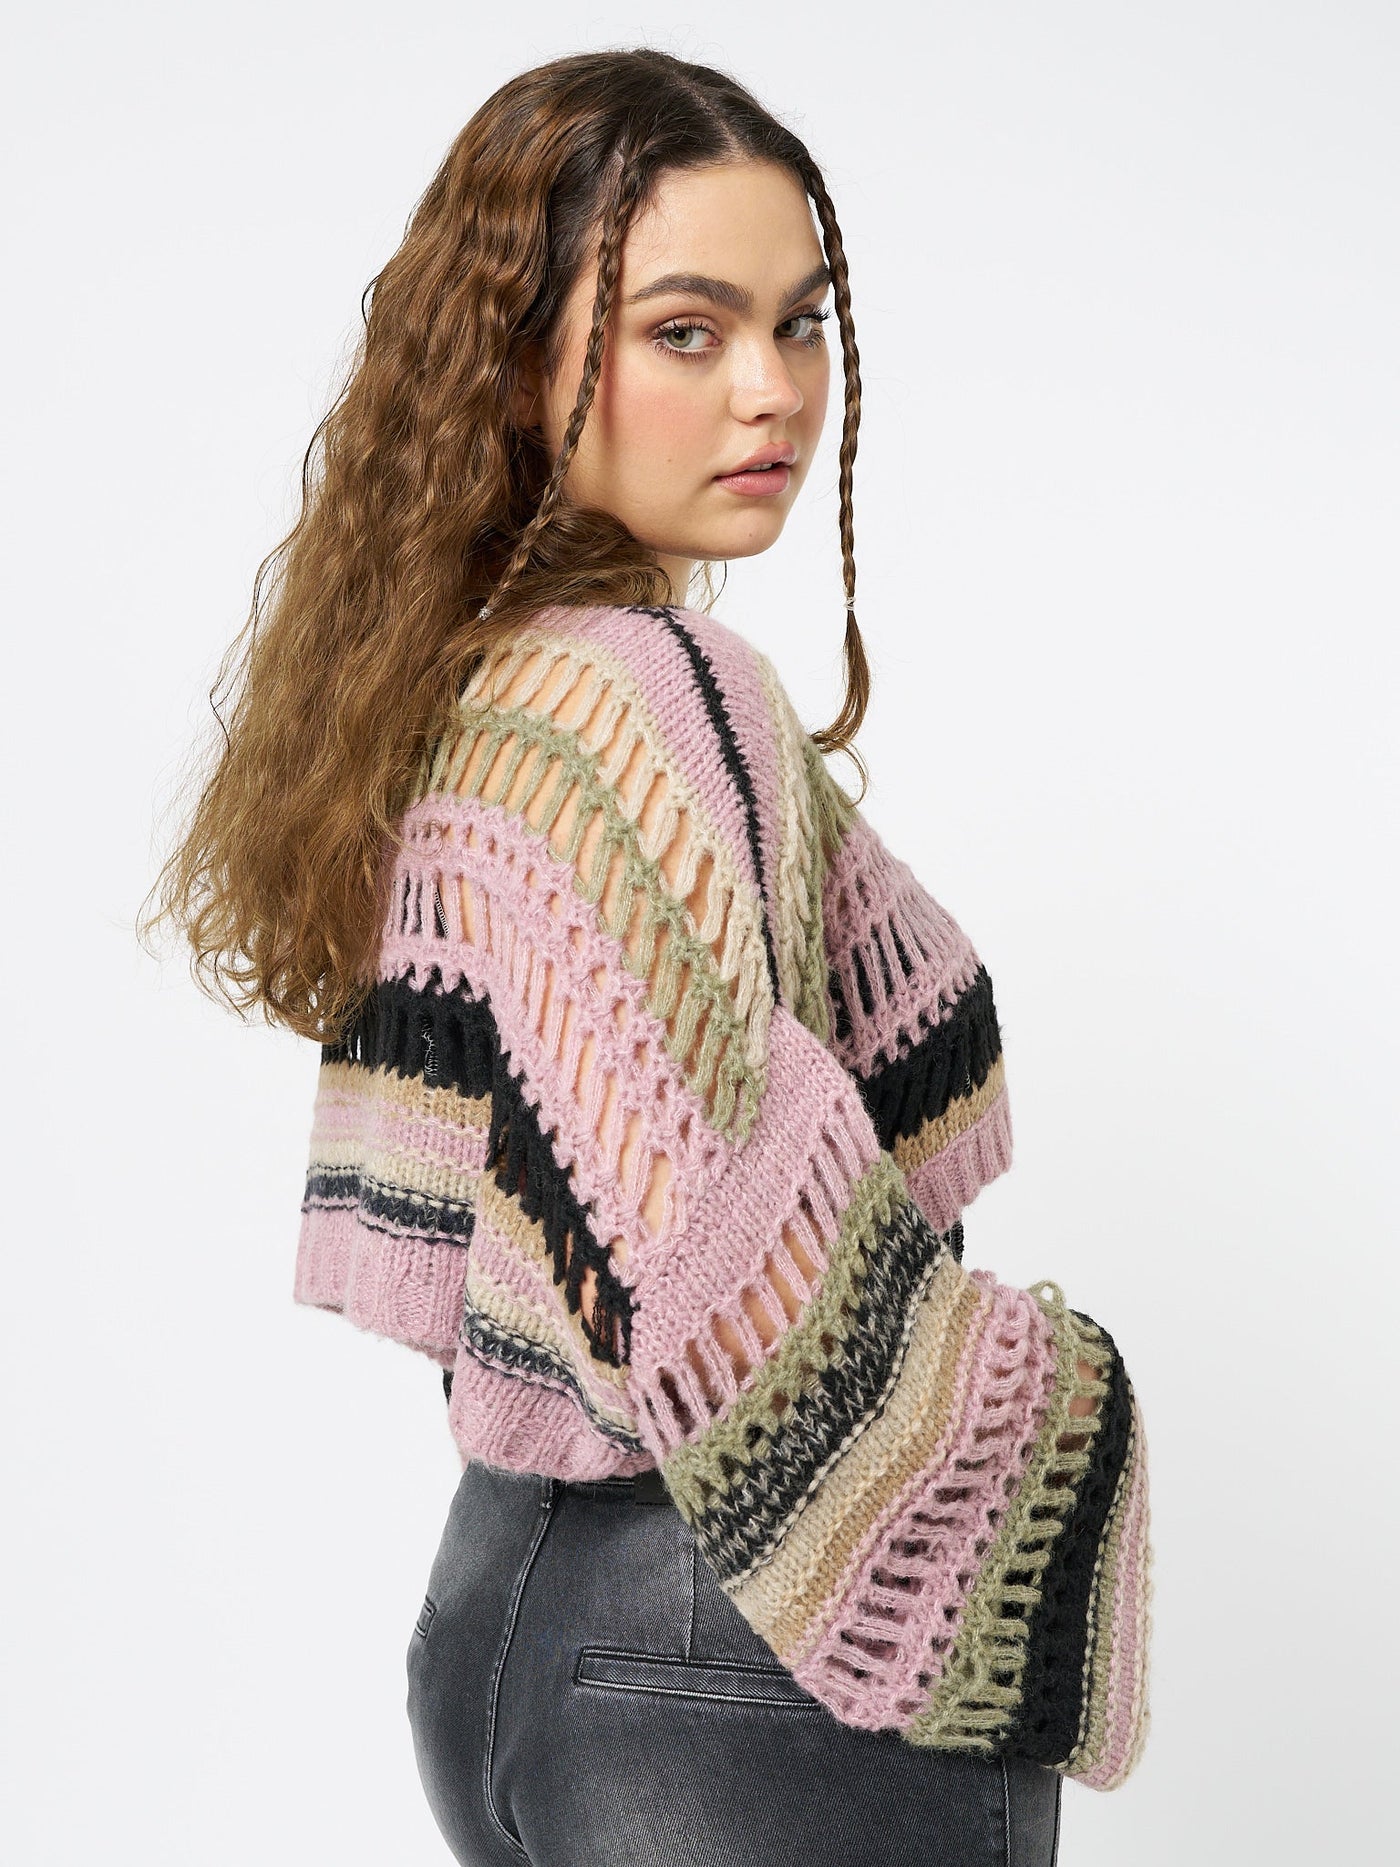 Giselle Pink Extreme Crop Knit Sweater